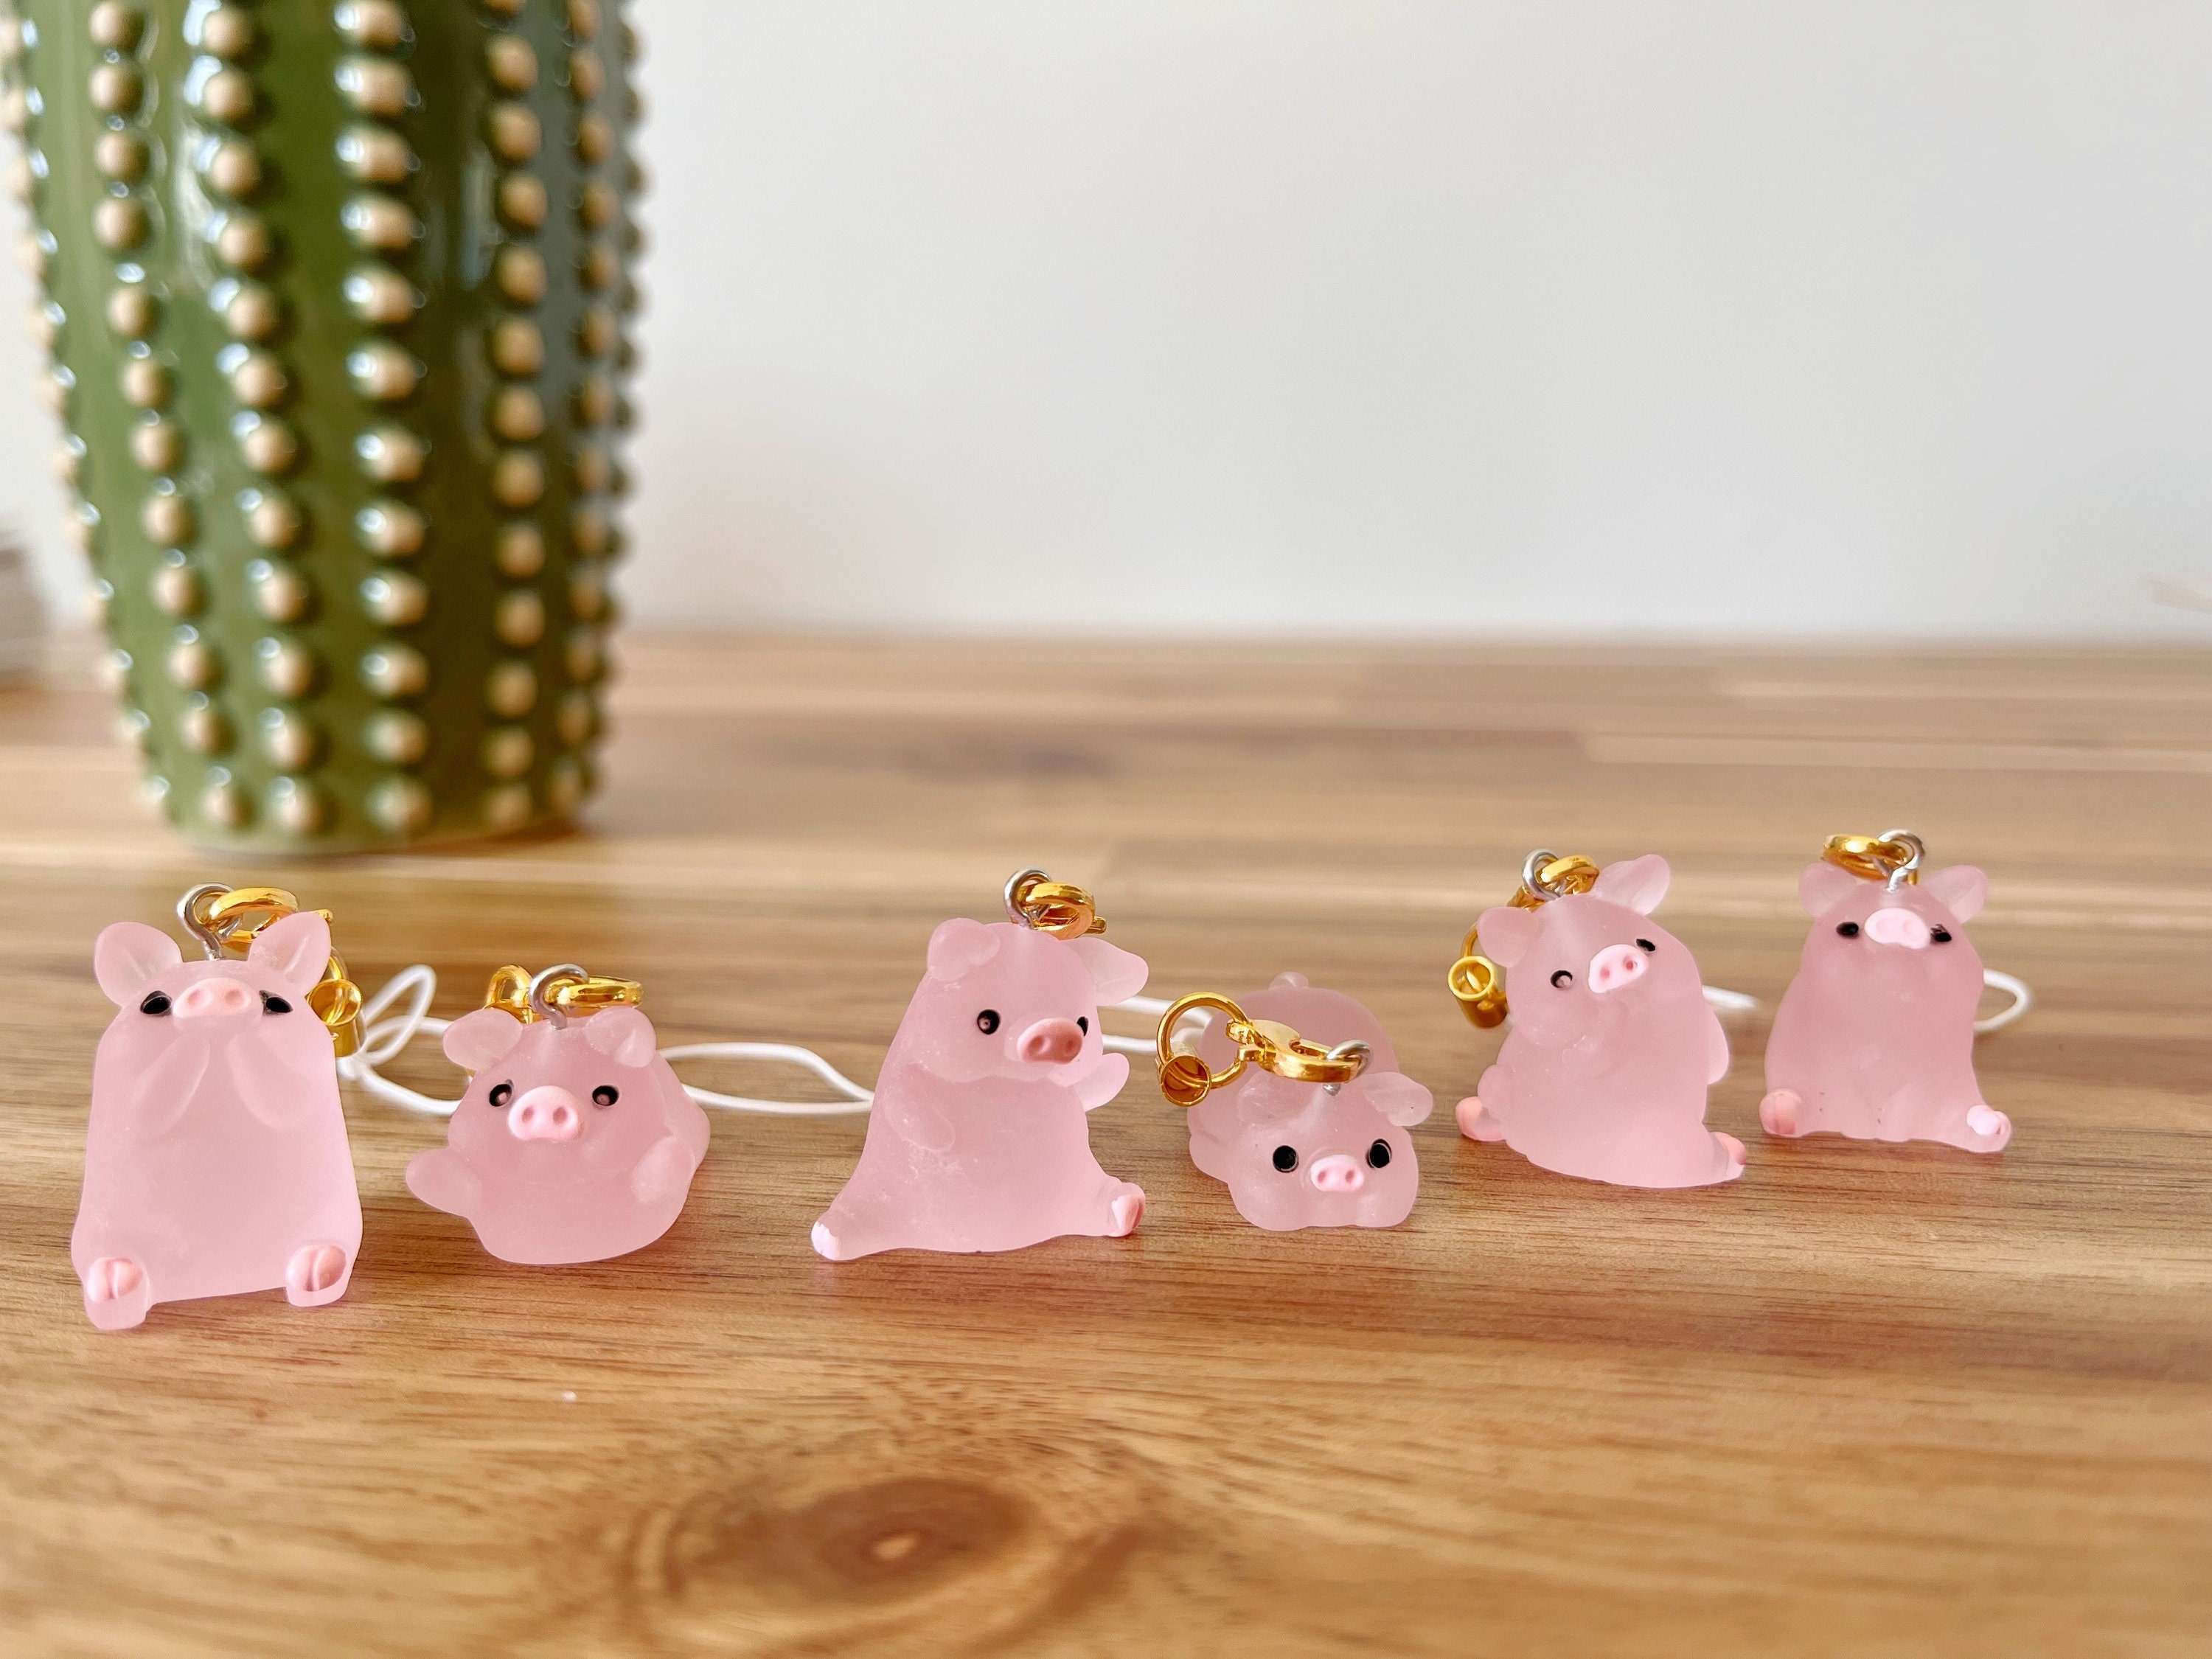 Couple Pig Bag Charm Keychain with Magnet